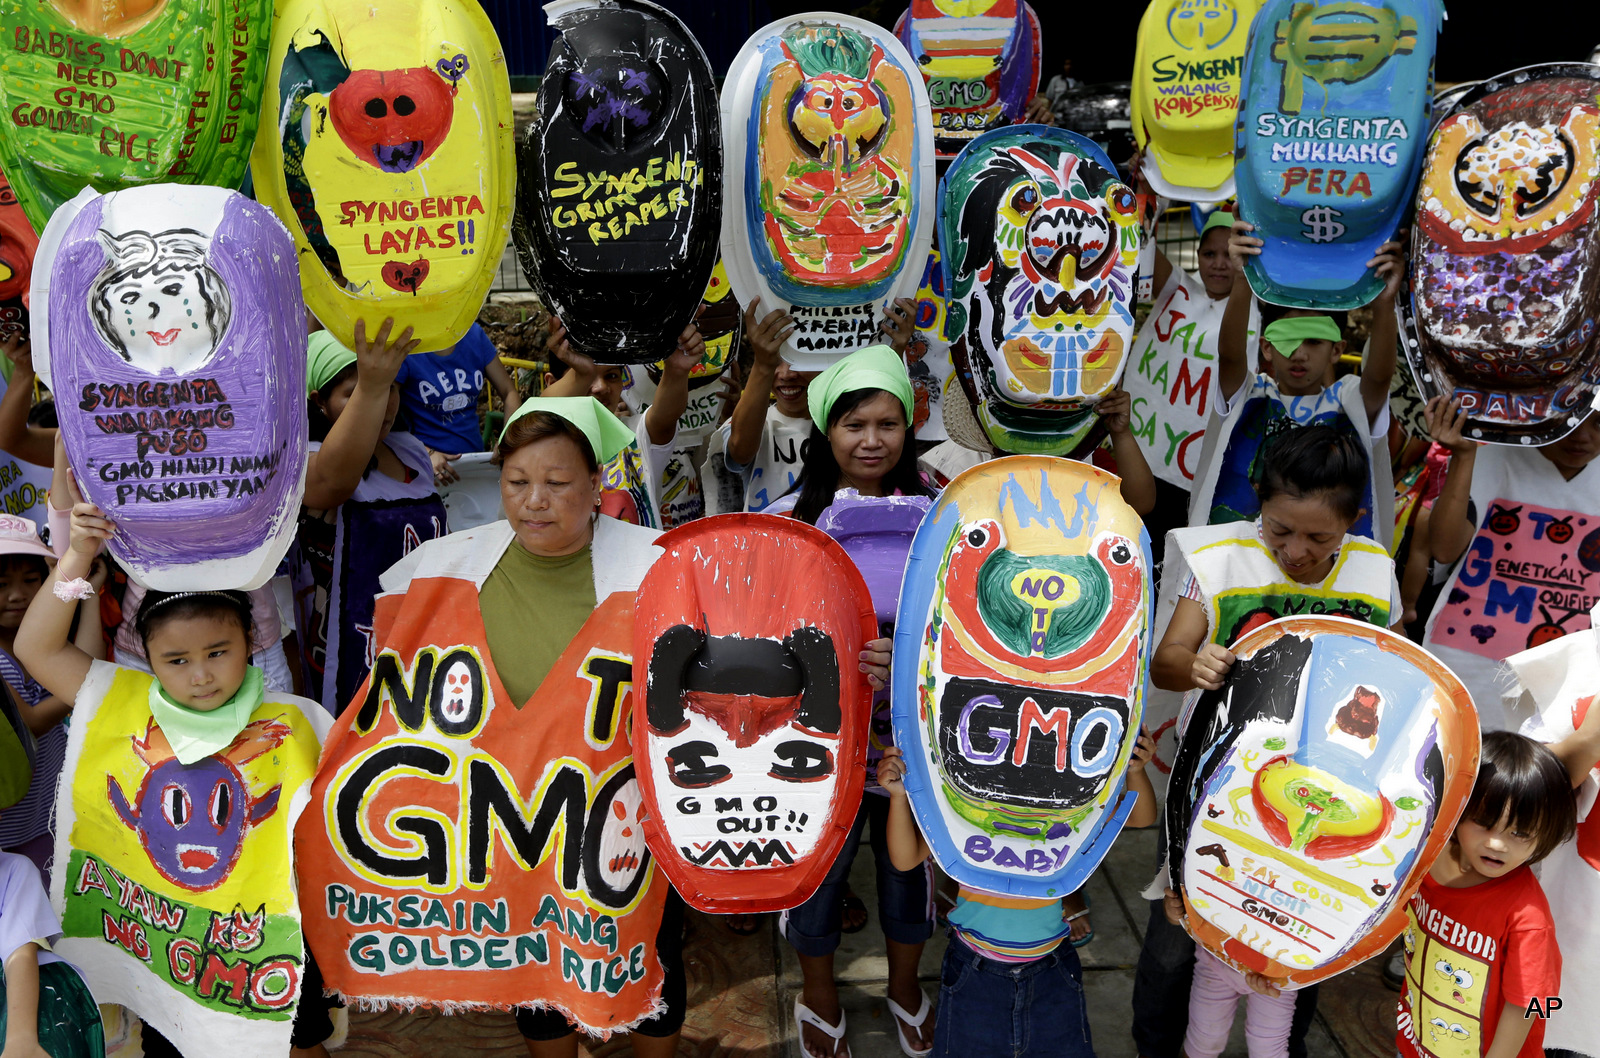 Mothers and children display painted baby tubs which they themselves designed during a protest on World Environment Day Wednesday June 5, 2013 at suburban Quezon city northeast of Manila, Philippines. The mothers have formed a coalition called "Green Moms" advocating organic foods and breastfeeding practices to show their opposition to a genetically modified rice variety known as "Golden Rice" which allegedly is being promoted by GMO (Genetically Modified Organisms) proponents as a quick fix solution to a Vitamin A Deficiency or VAD especially for new-born babies and lactating mothers.